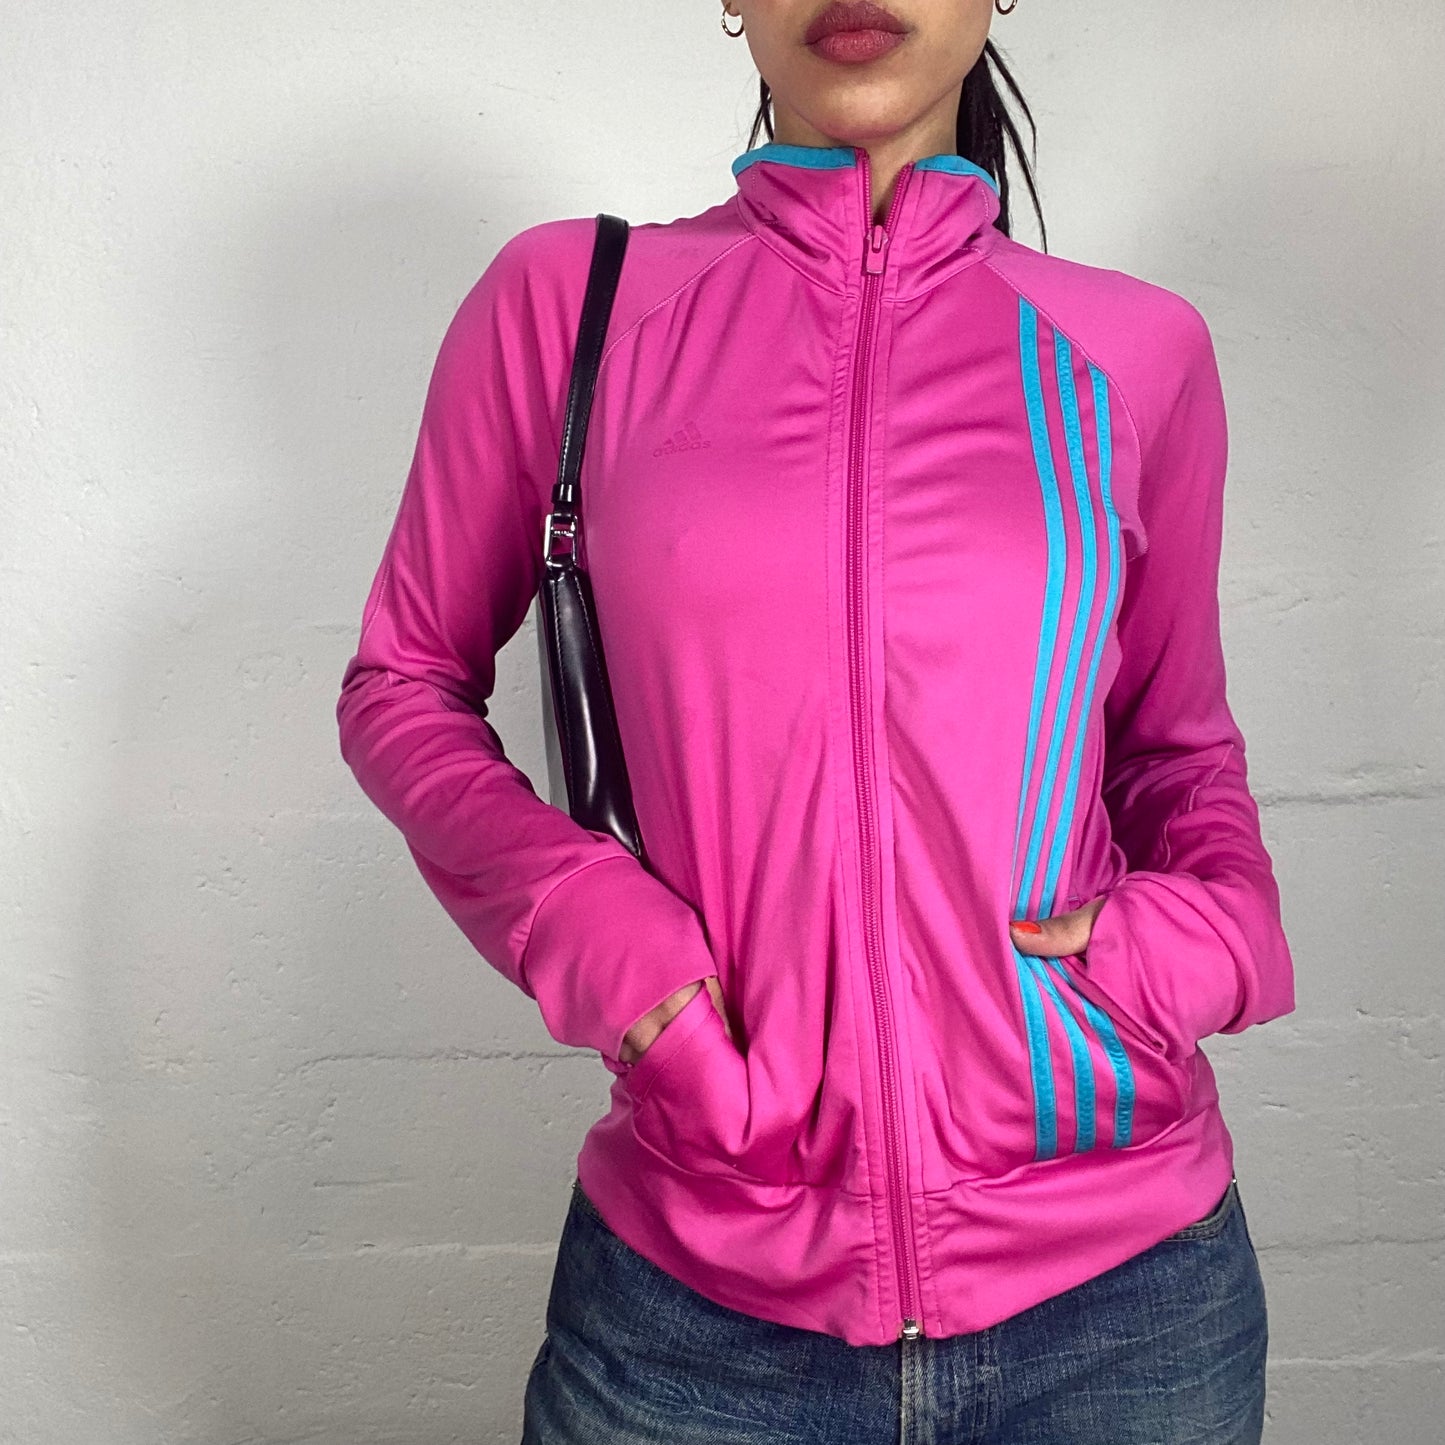 Vintage 90's Sporty Neon Pink Zip Up Pullover with Blue Stripes (S)